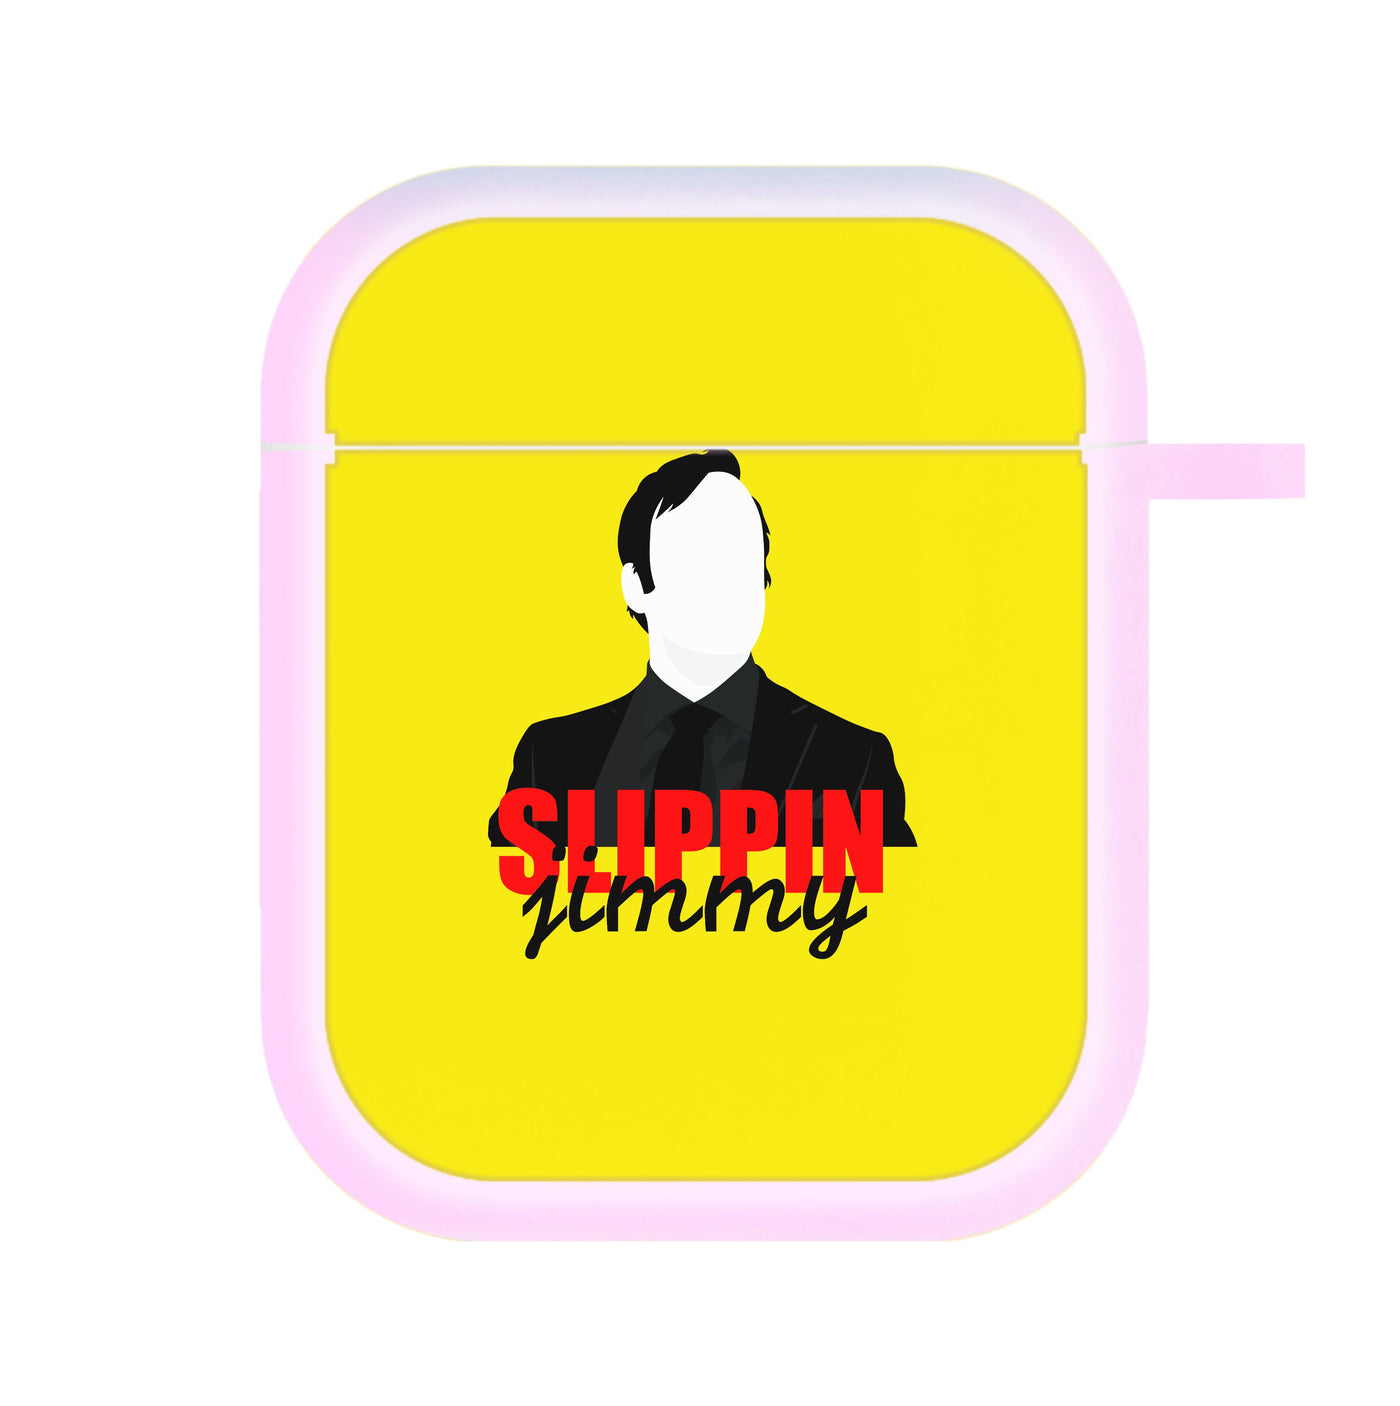 Saul Jimmy - Better Call Saul AirPods Case